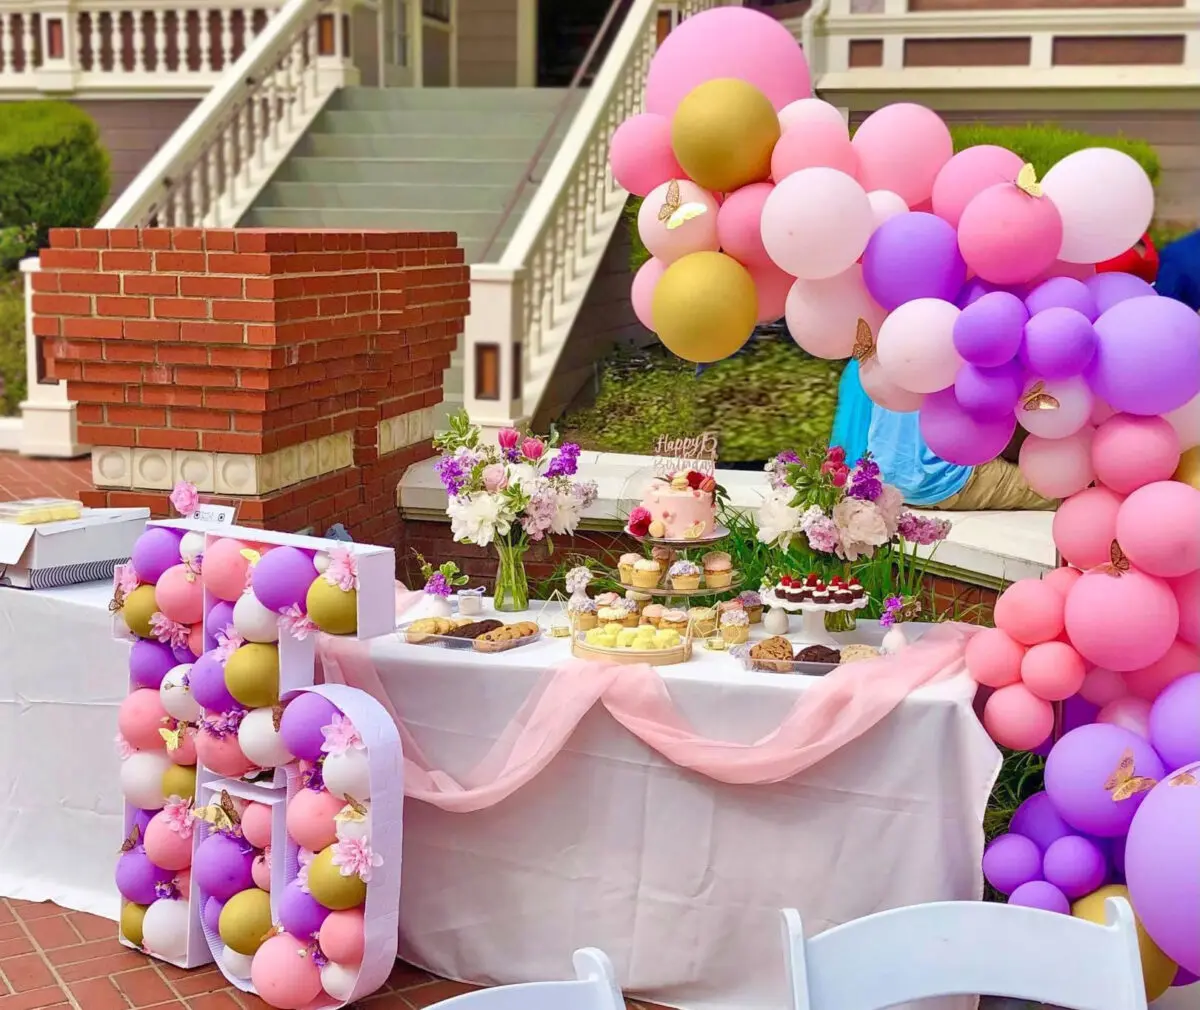 Outdoor birthday party setup at Heritage Square, Oxnard, with a table of desserts, colorful balloons, and white chairs in front of a house.